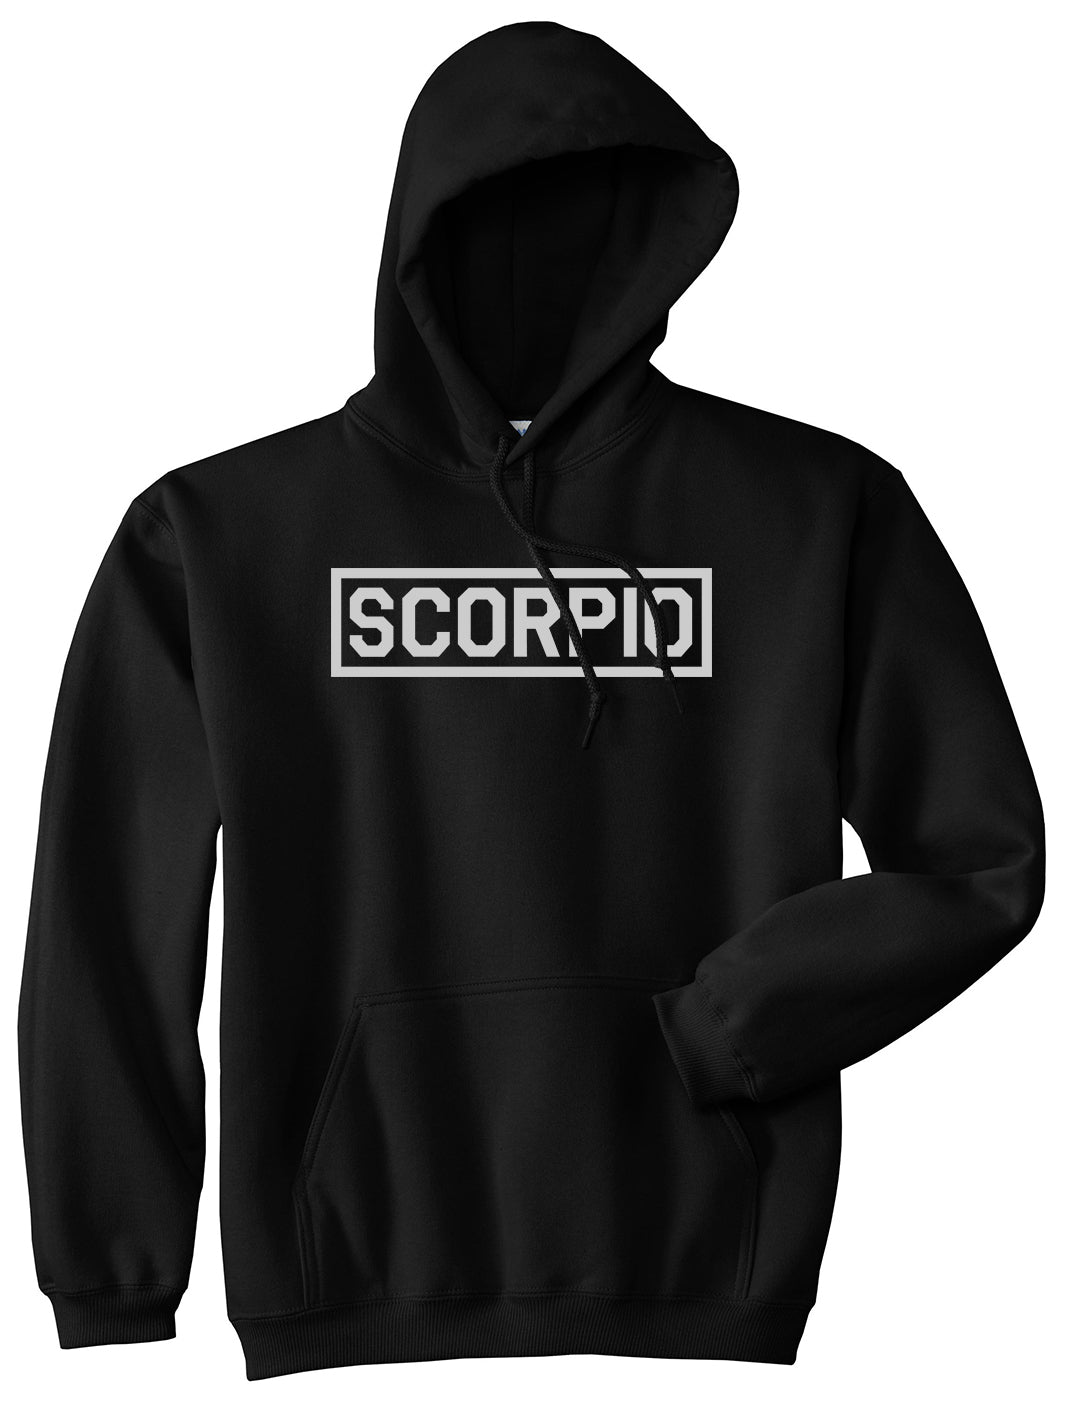 Scorpio Horoscope Sign Mens Black Pullover Hoodie by KINGS OF NY